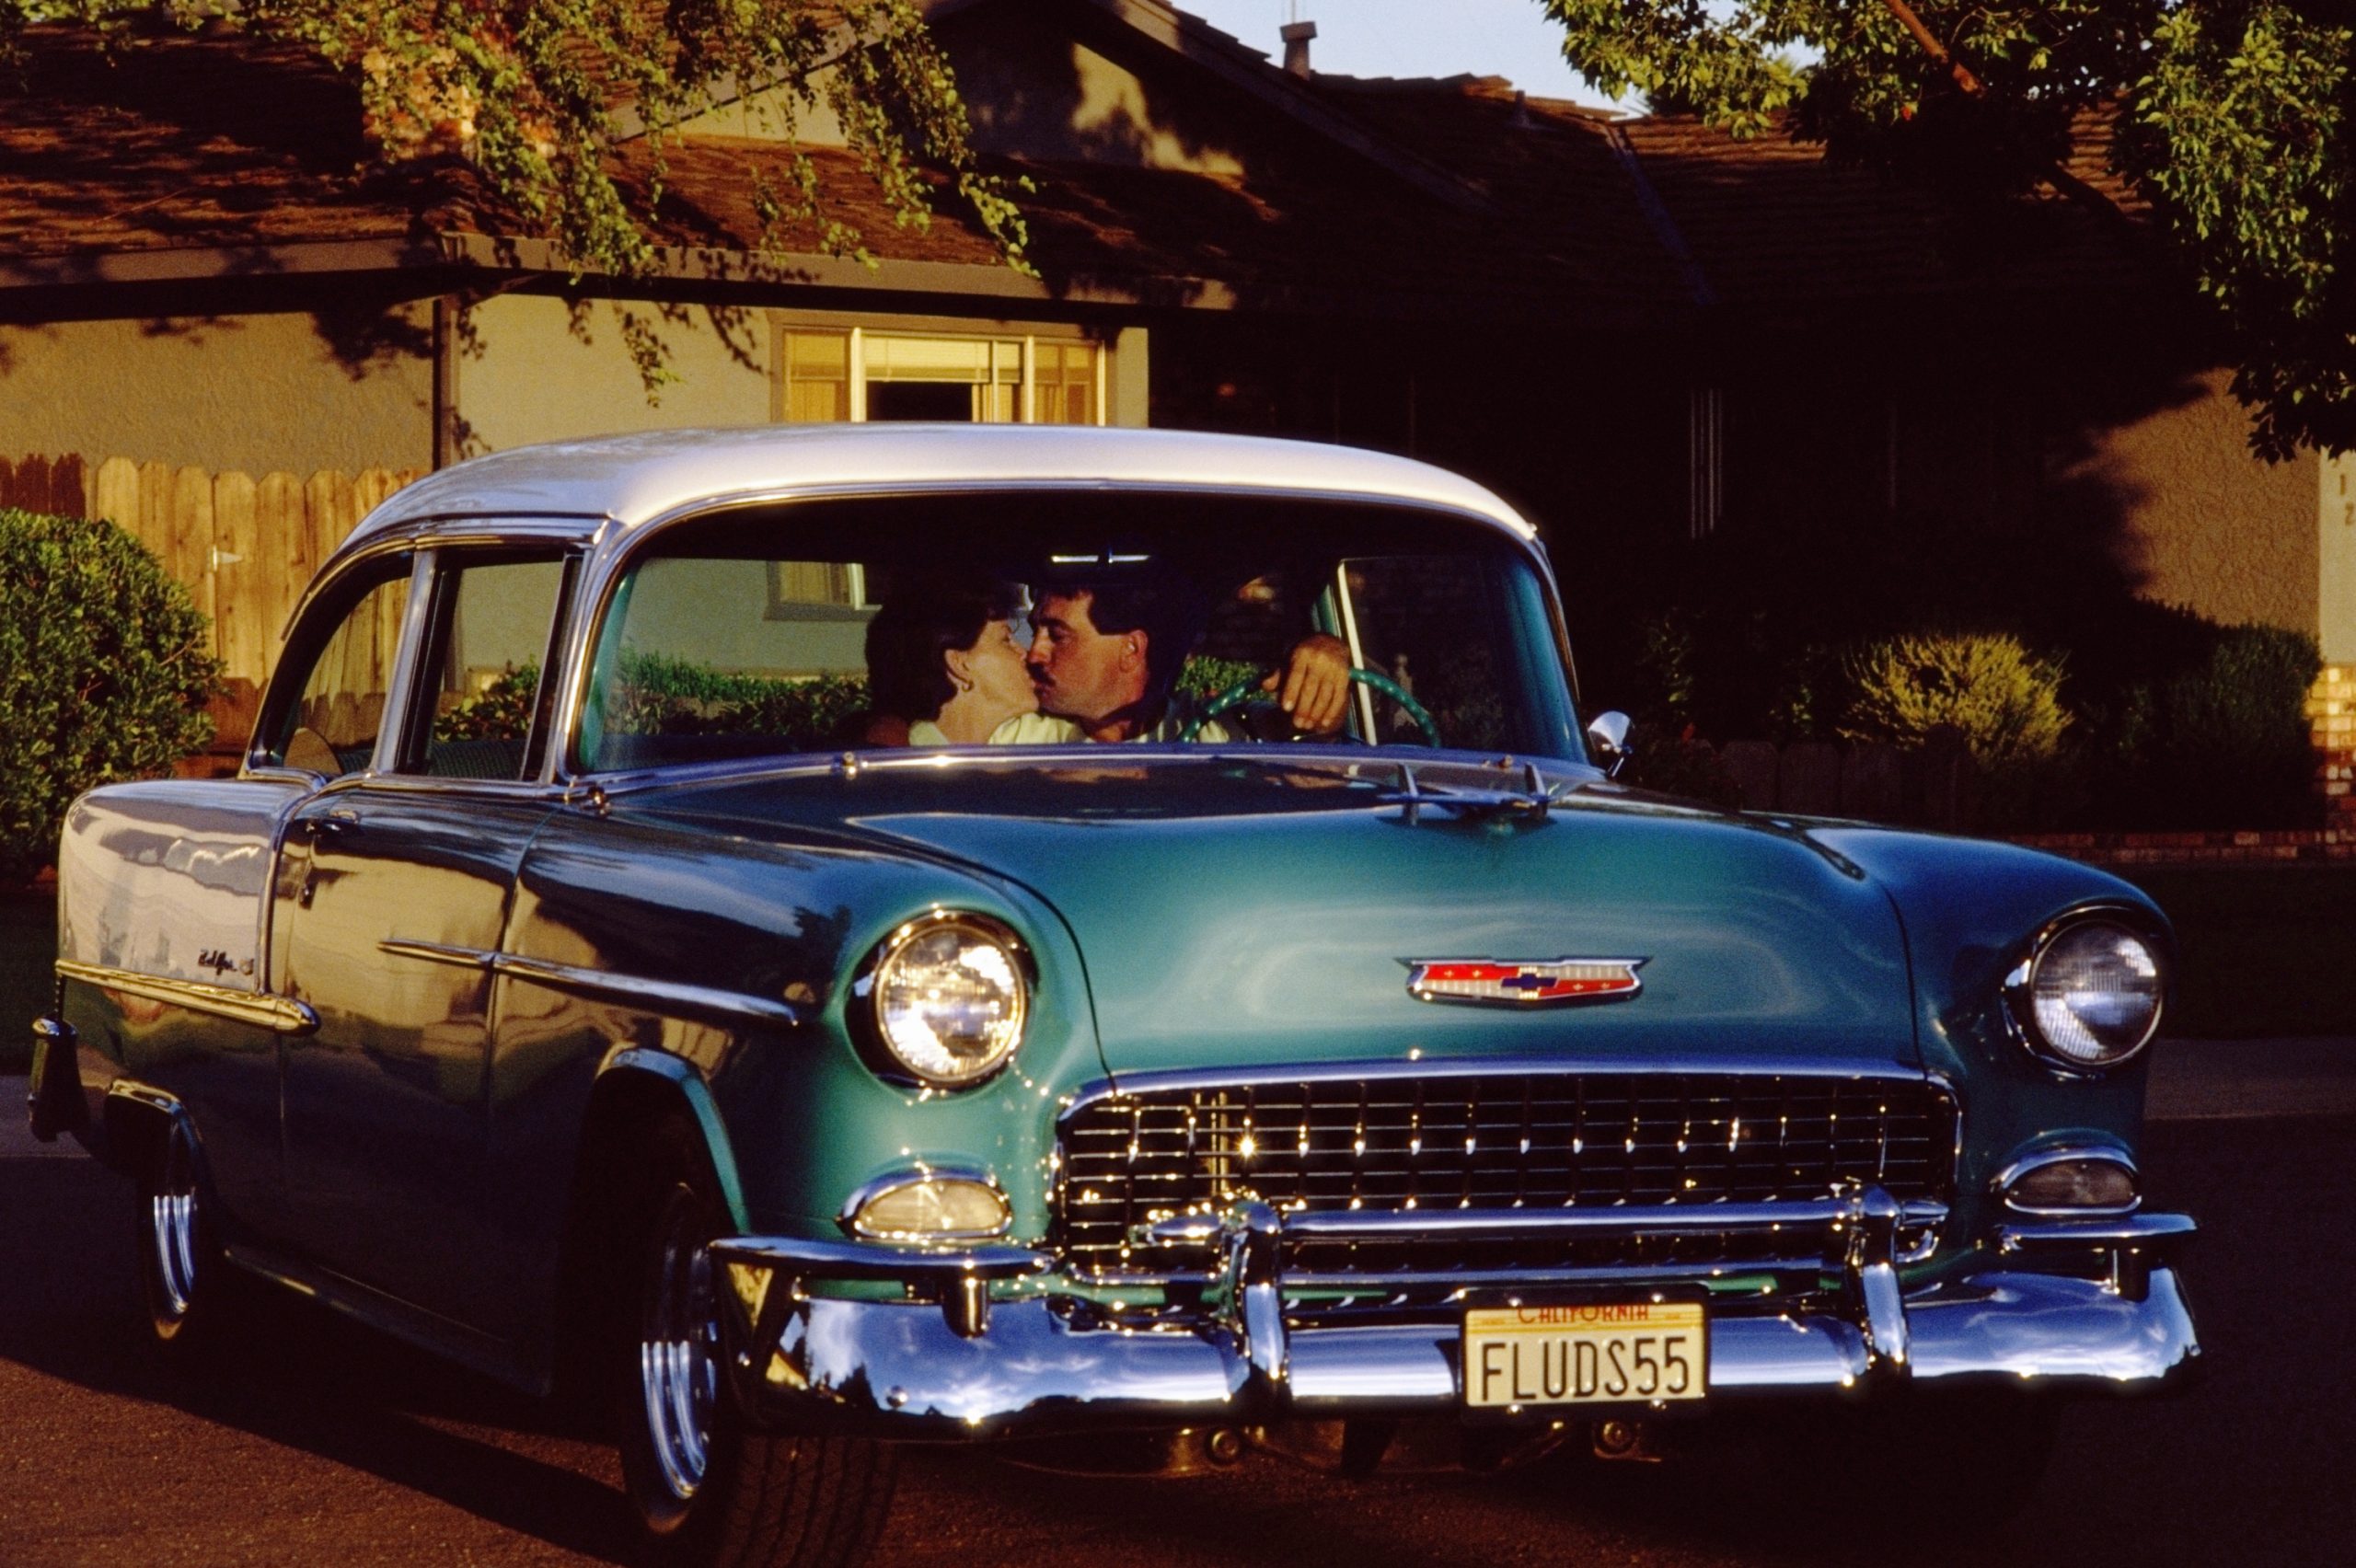 A couple kissing during a car date in a blue vintage car